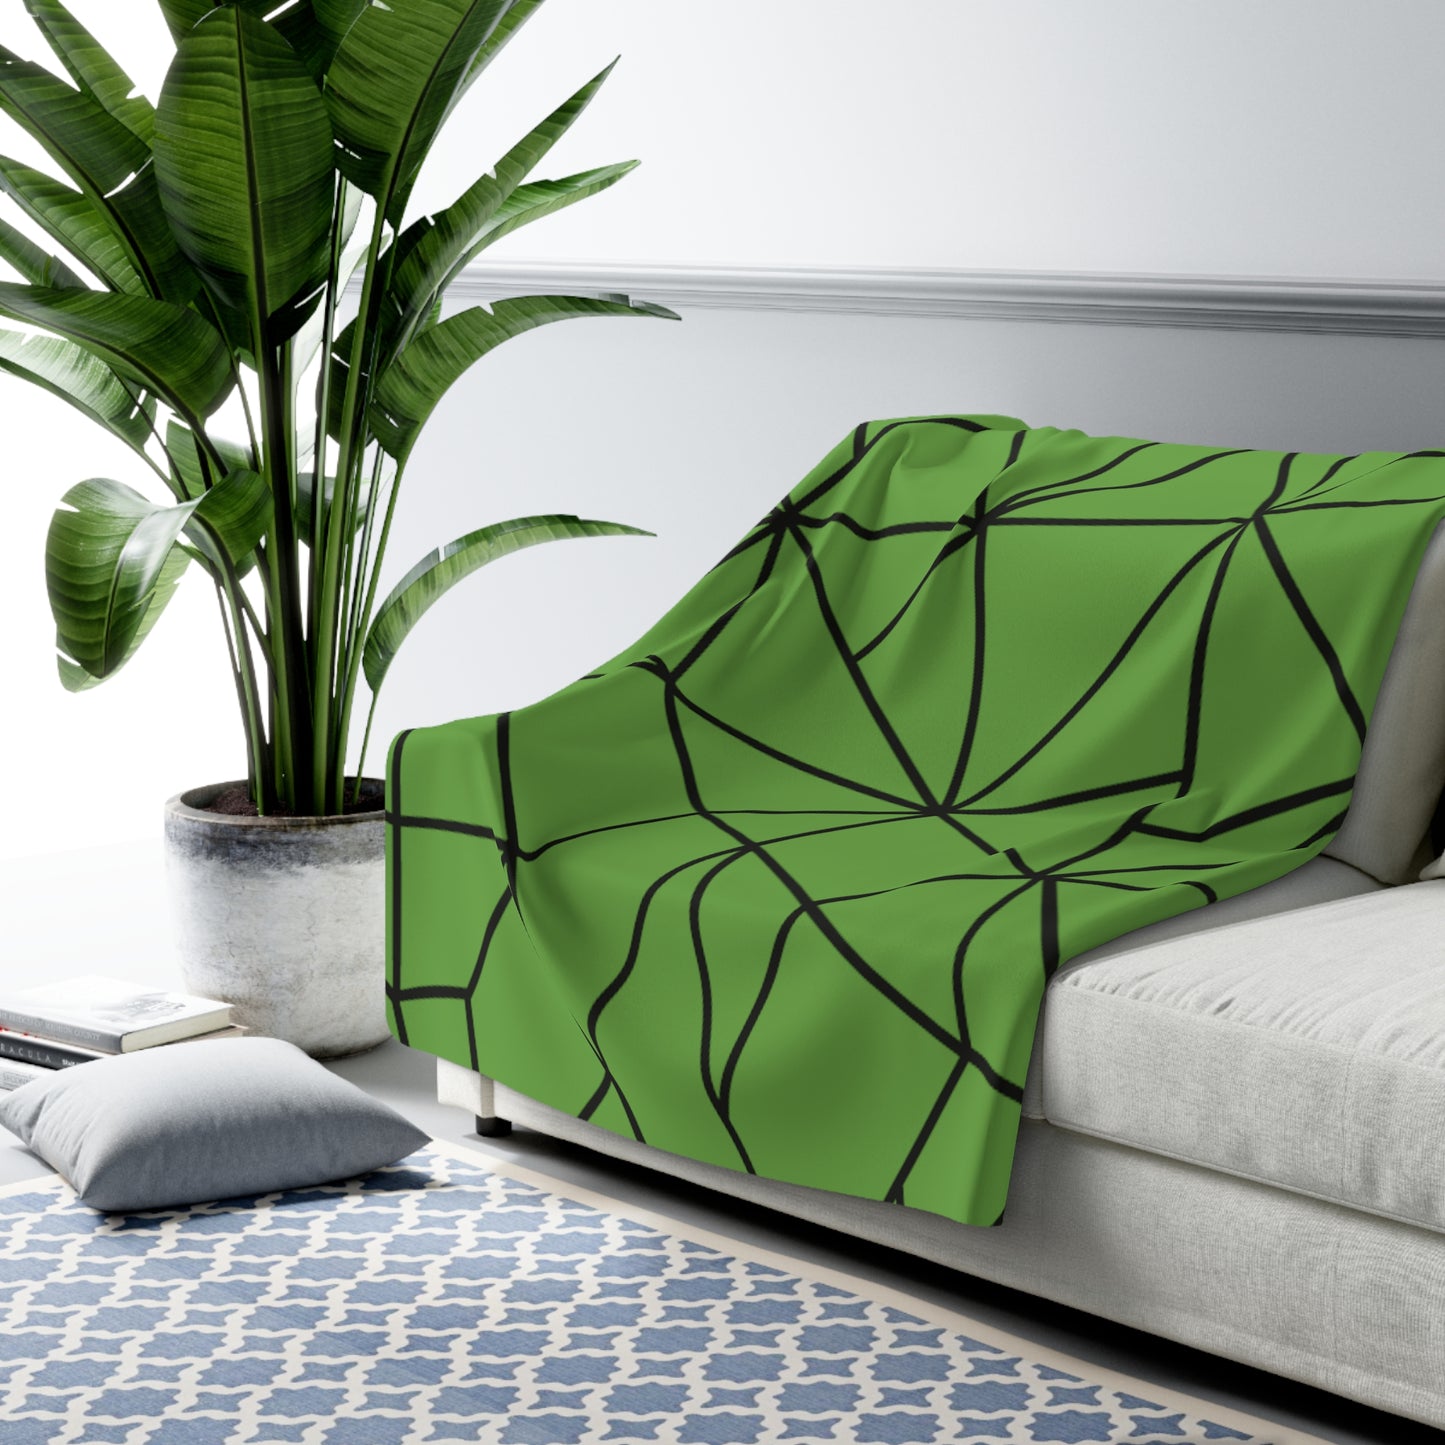 LUXURIOUS COZY BLANKET: THE EPITOME OF COMFORT AND WARMTH | Pattern triangle green